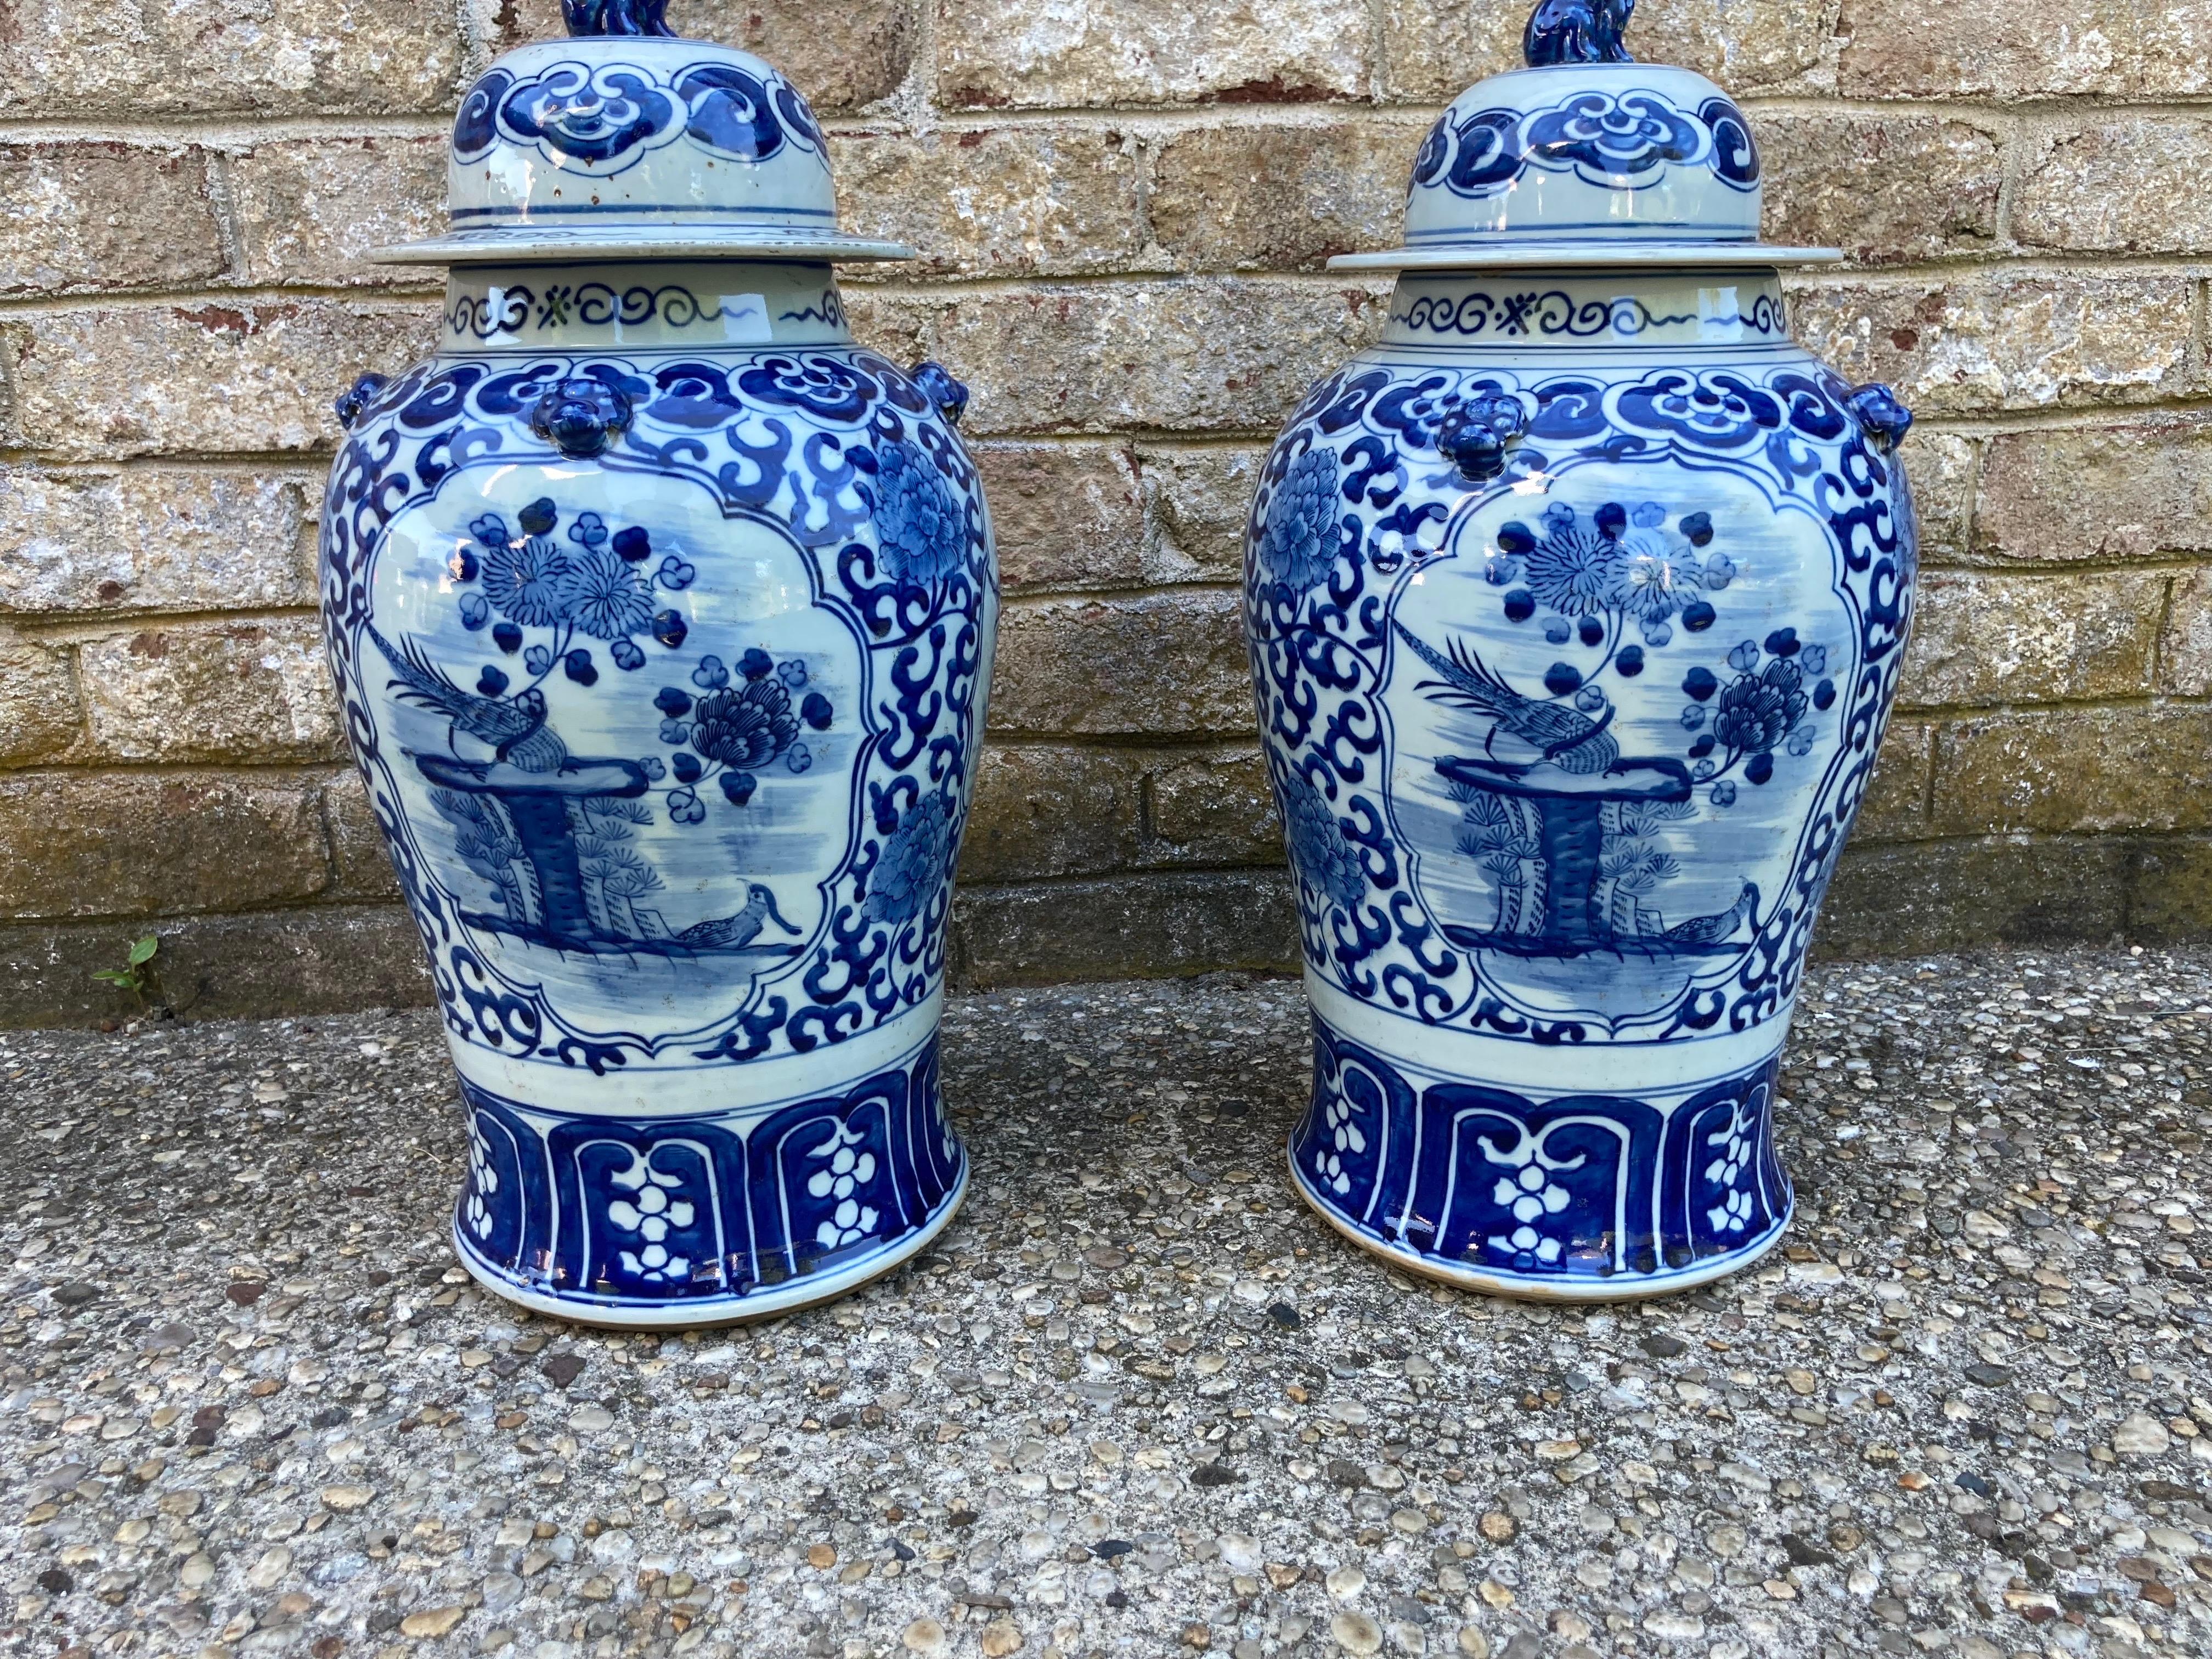 Pair of Chinese blue and white jars with lids. Foo dogs on lids and birds depicted on the jars.